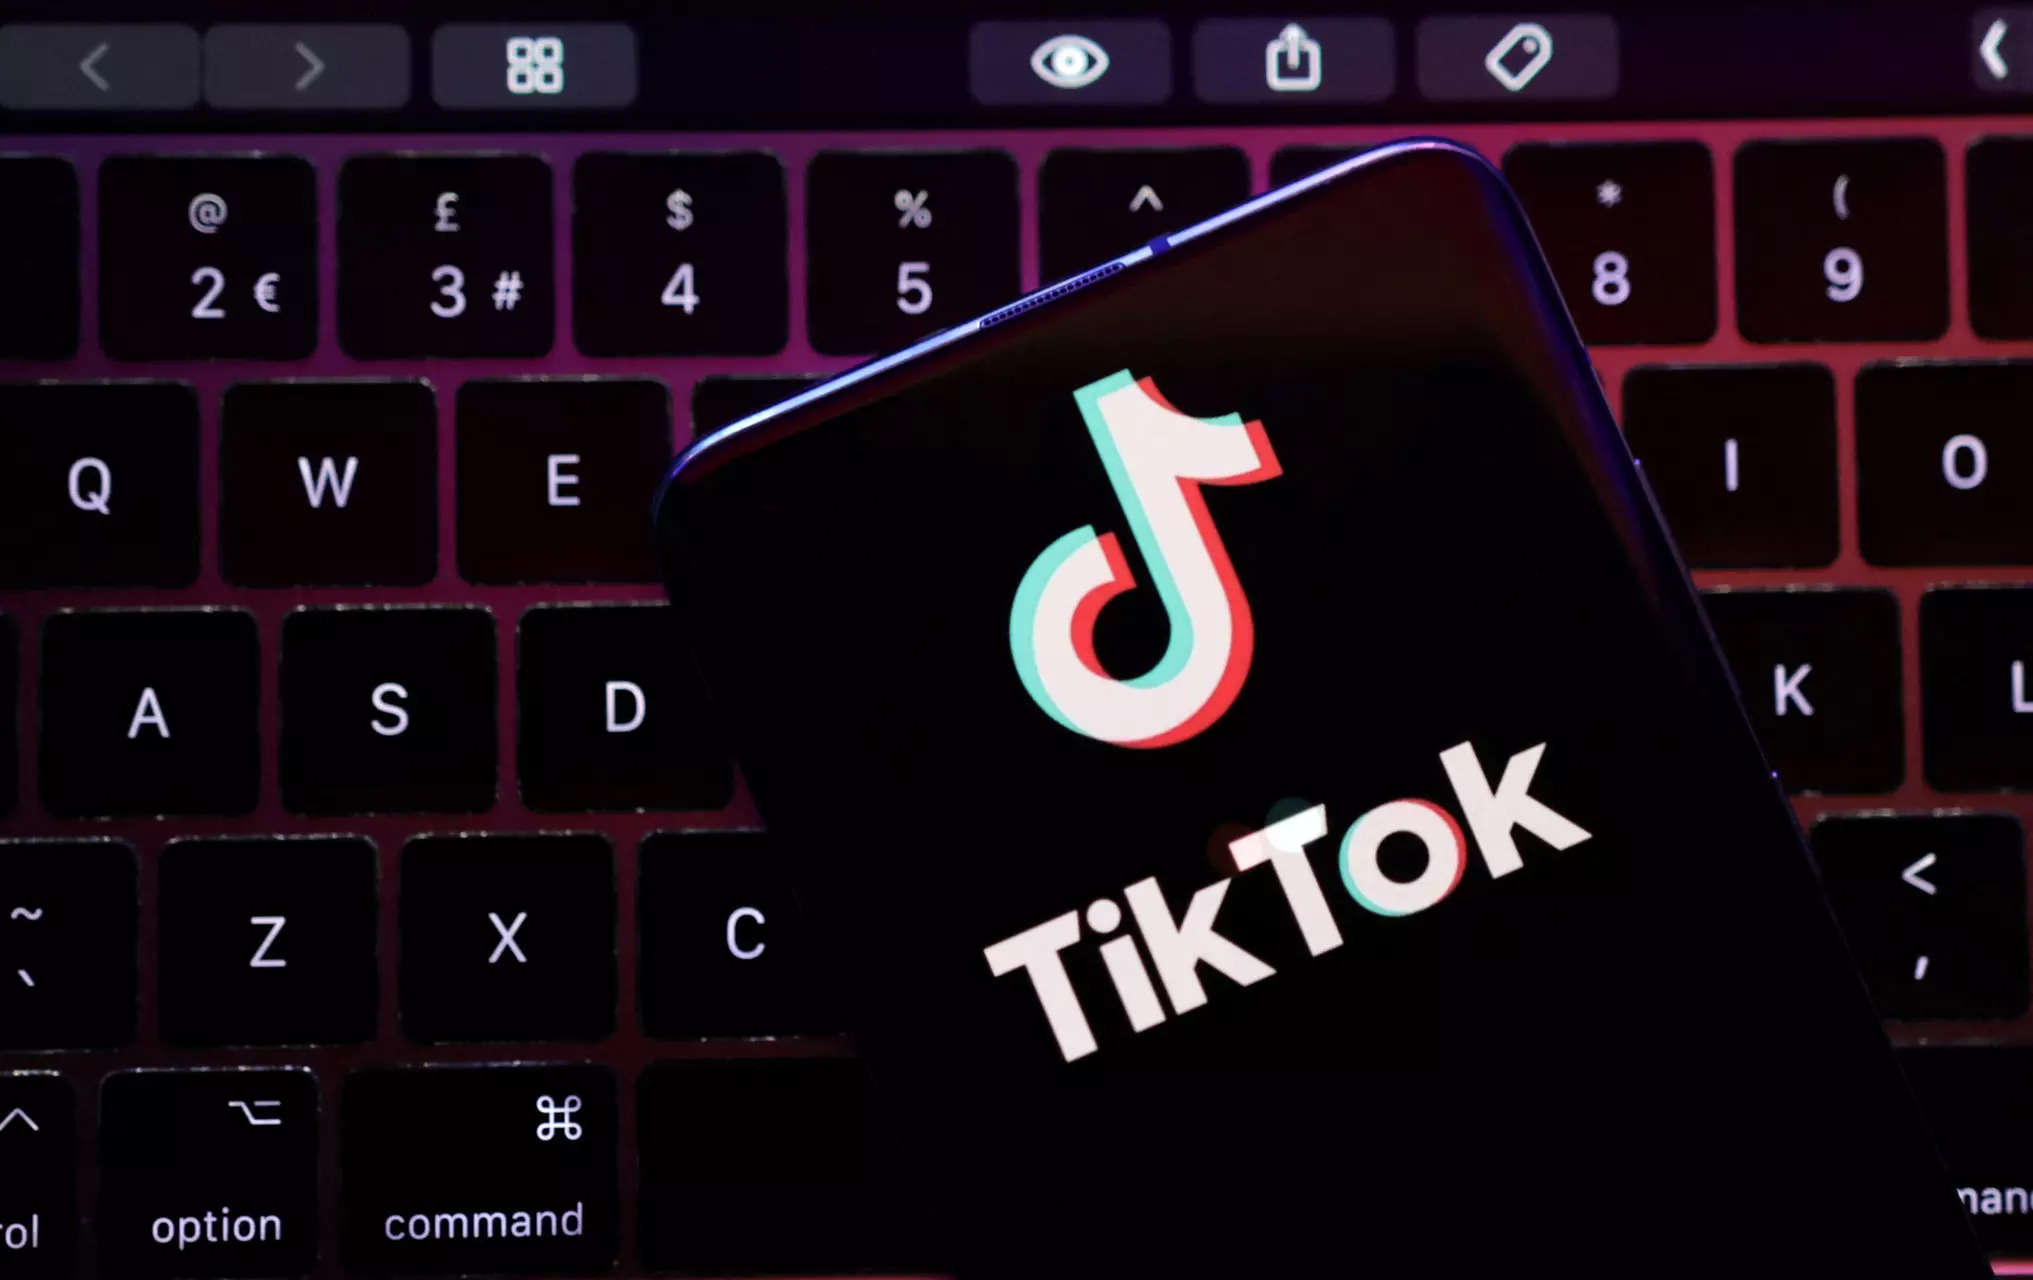 TikTok users can earn $100 per hour to watch short-video app for 10 hours. Check last date to apply